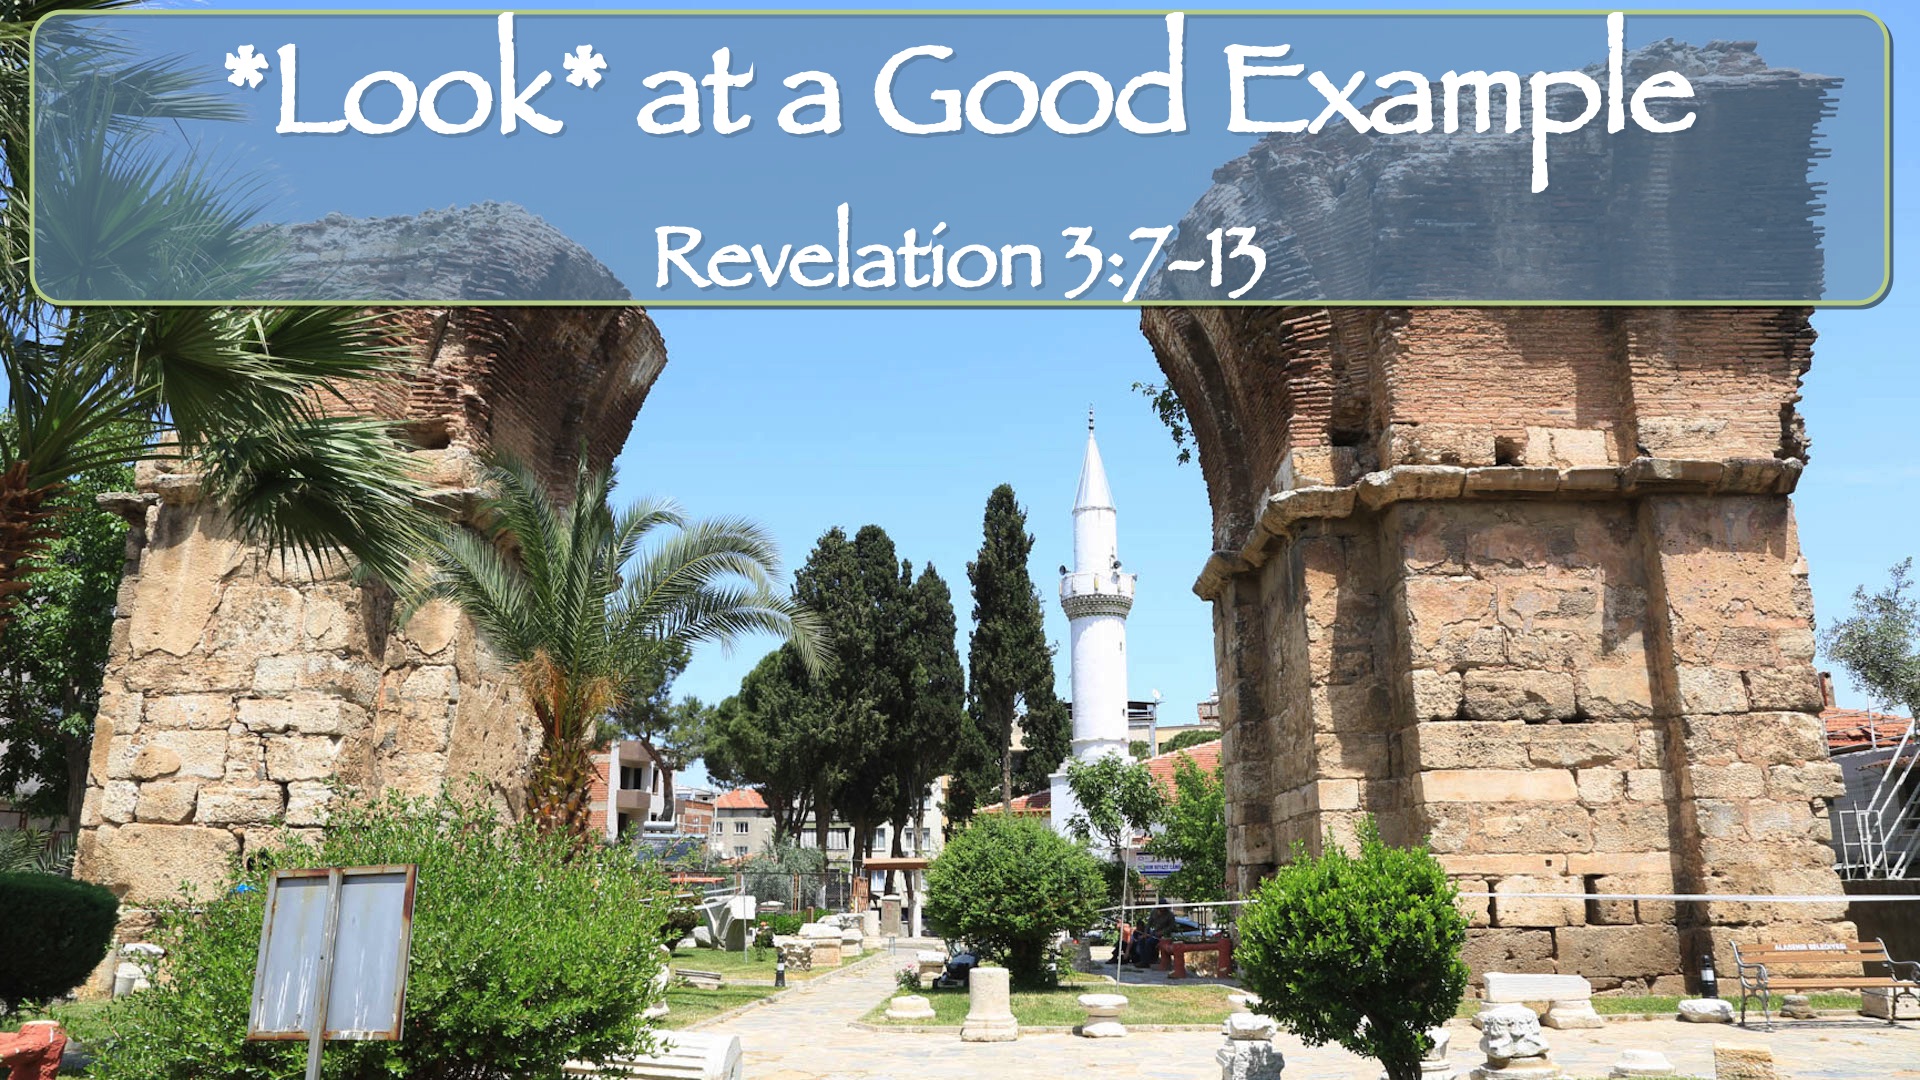 The Book of Revelation:  “Look” at a Good Example